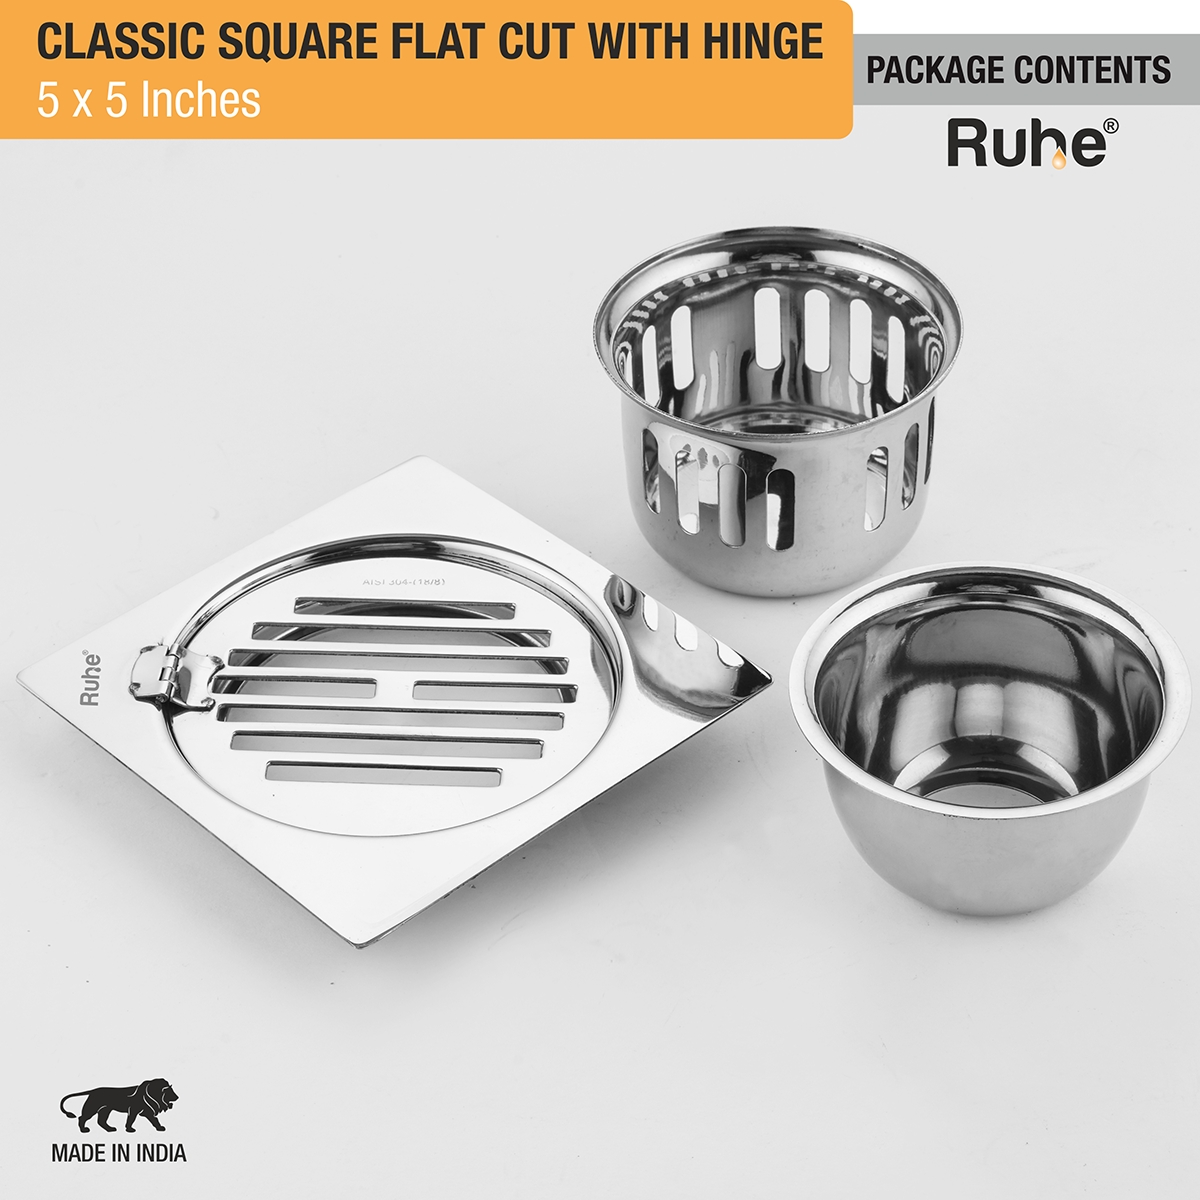 Classic Square Flat Cut Floor Drain (5 x 5 Inches) with Hinge & Cockroach Trap (304 Grade) package content